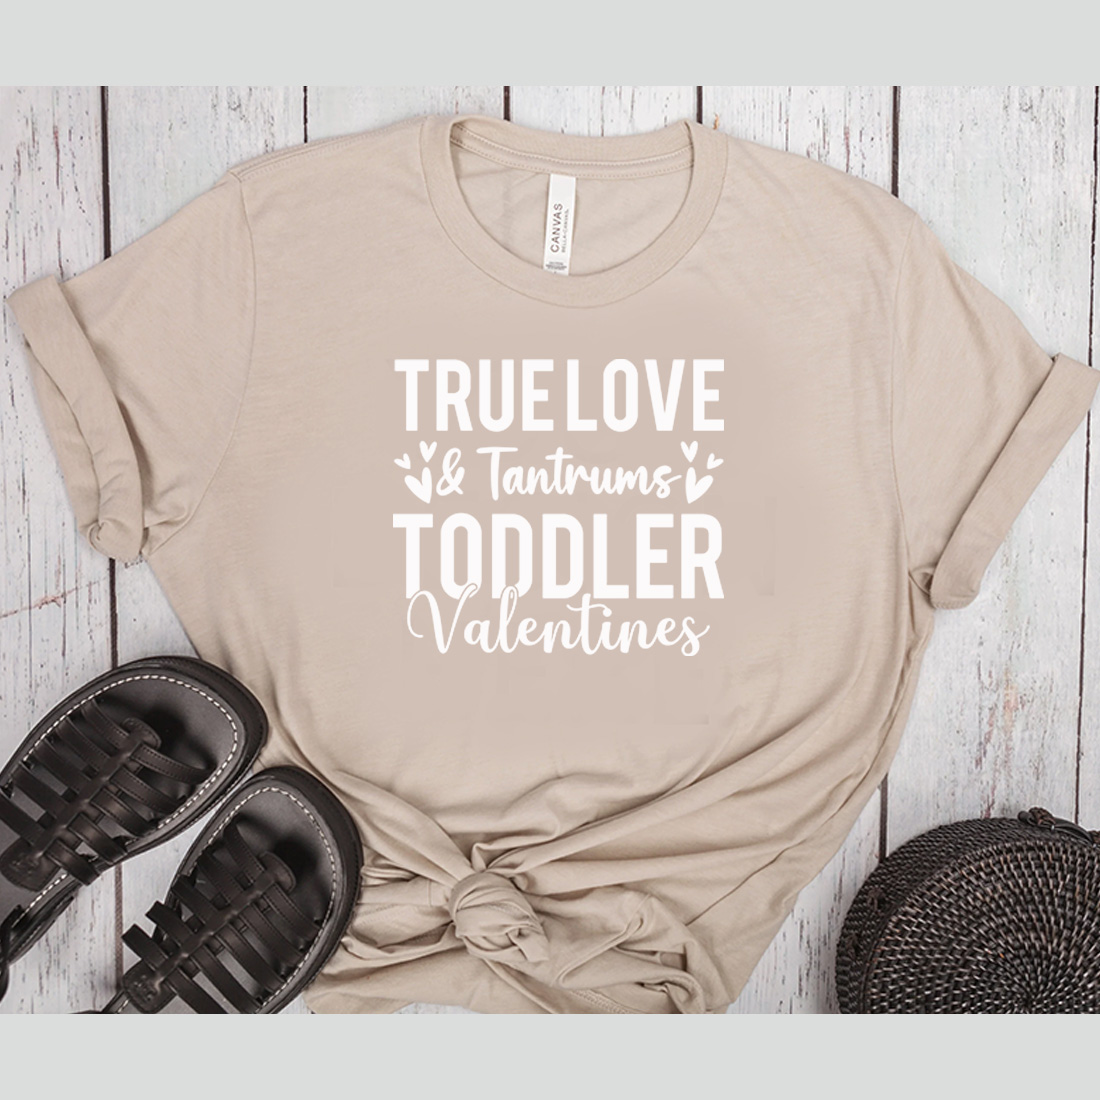 Picture of T-shirt with exquisite slogan True Love & Tantrums Toddler Valentines